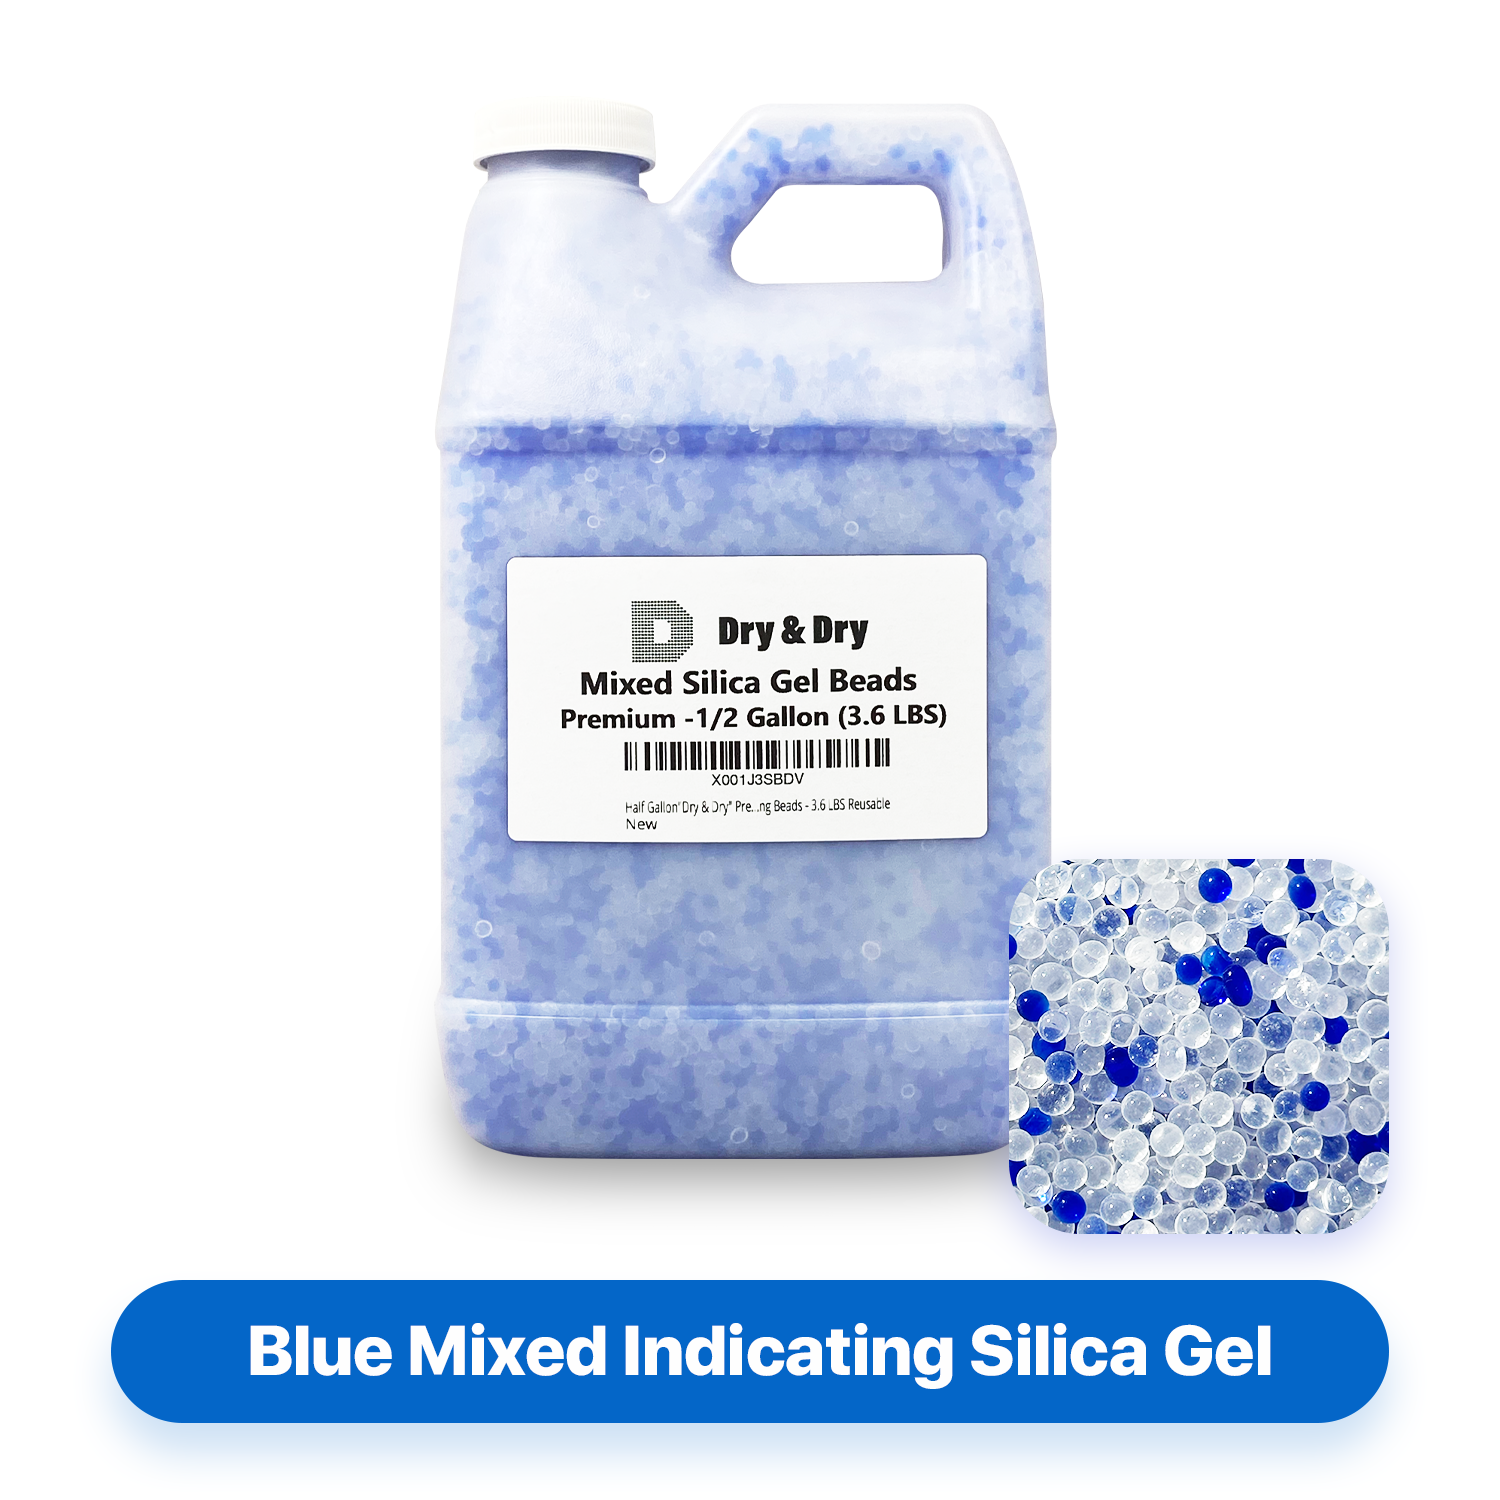 1500 g Drymixx silica gel spherical mix indicating - HOME pack